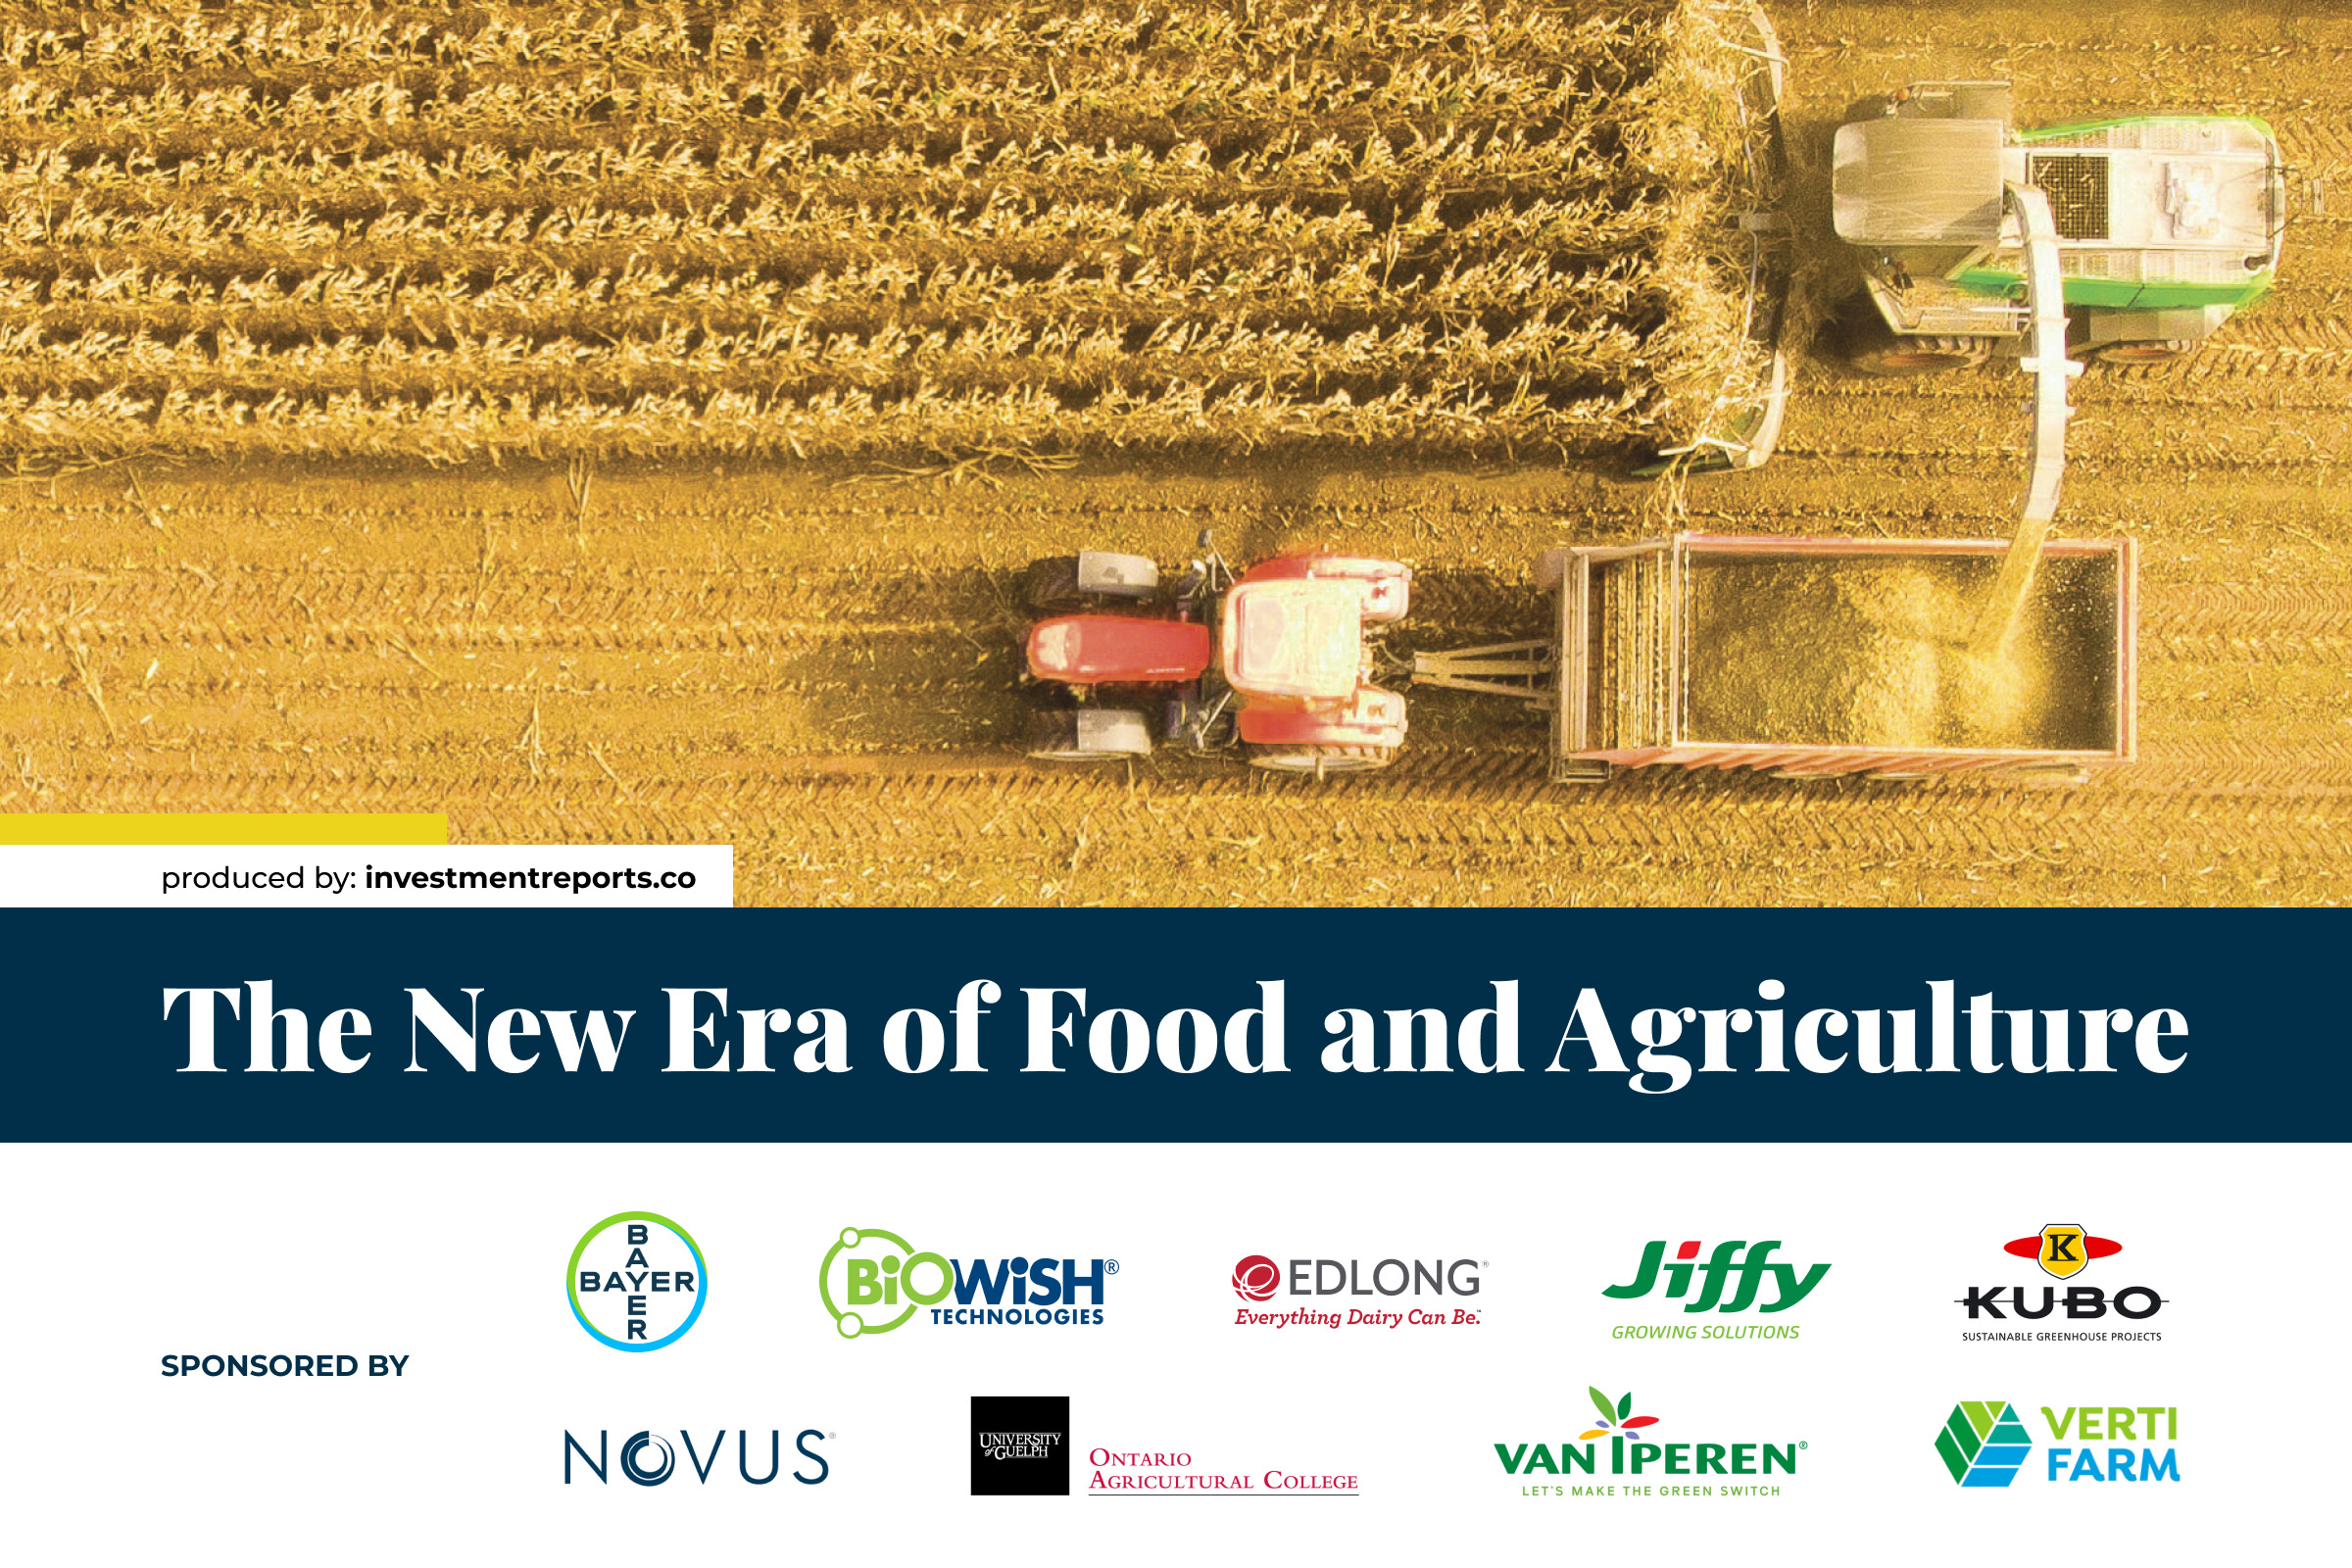 The New Era of Food and Agriculture